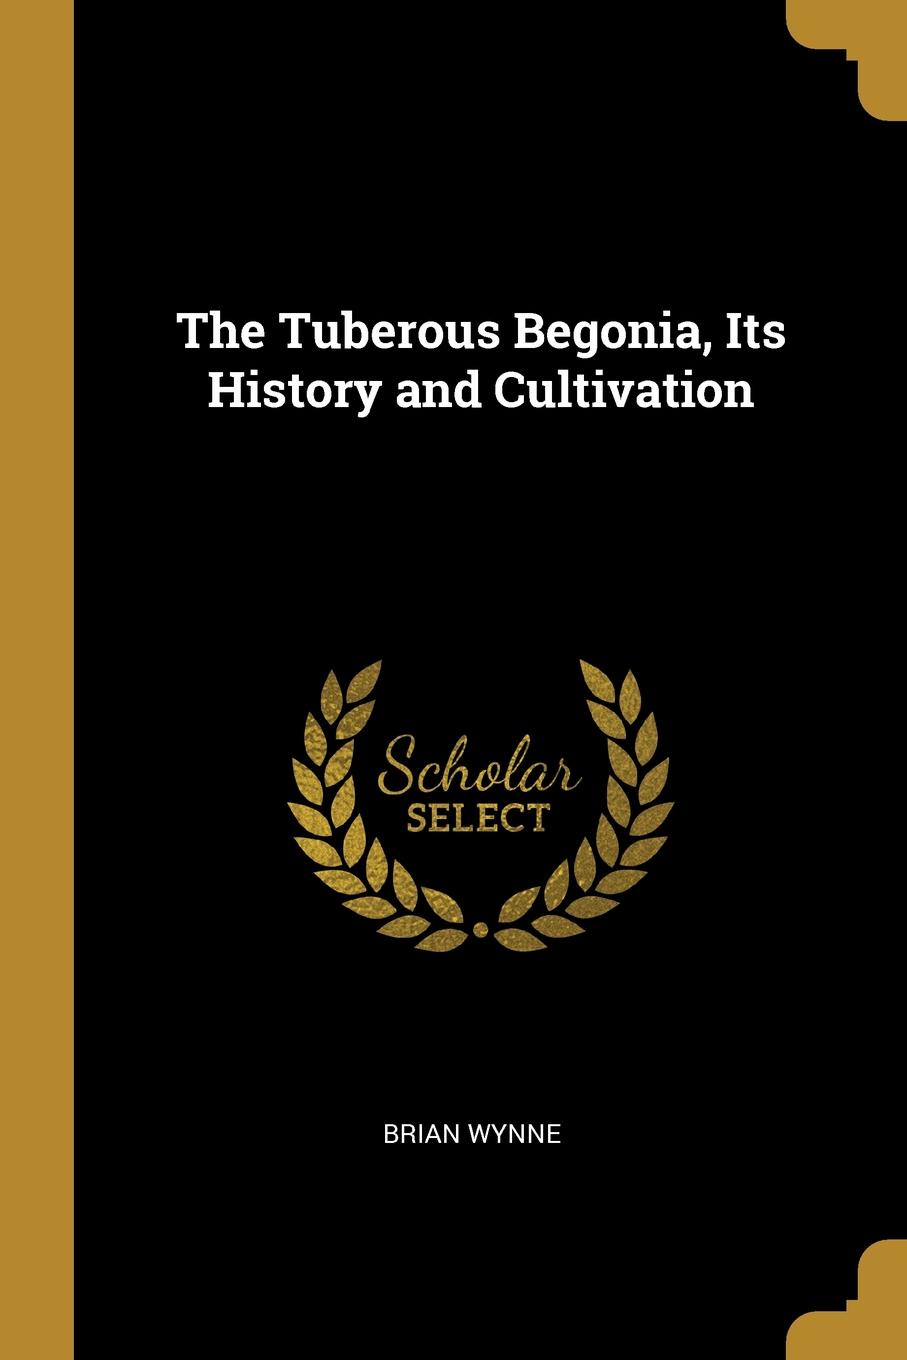 The Tuberous Begonia, Its History and Cultivation